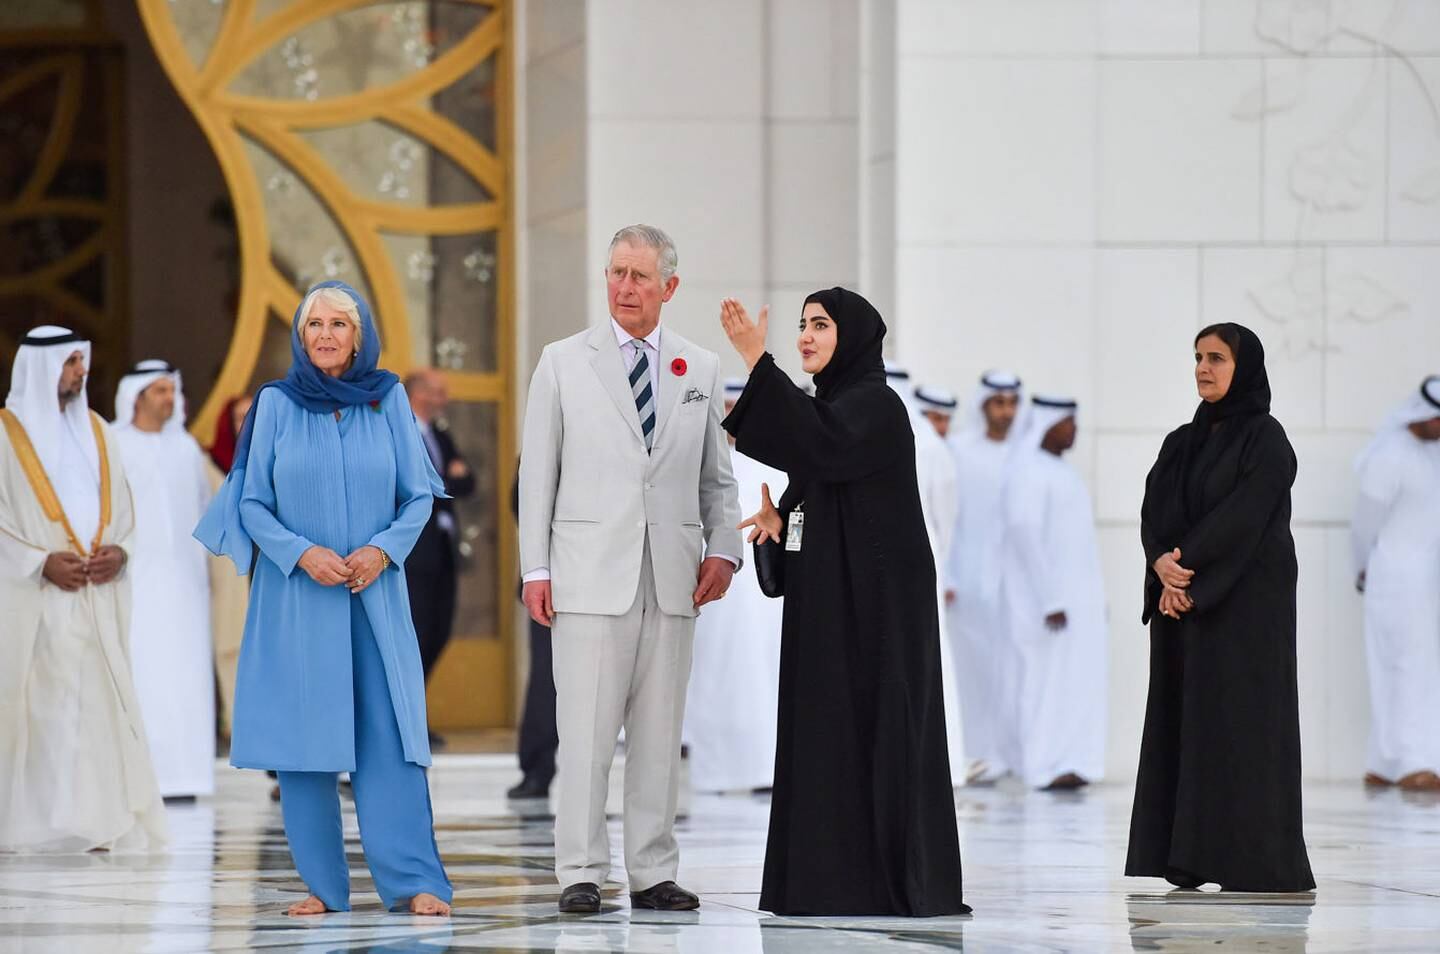 ABU DHABI, UNITED ARAB EMIRATES - NOVEMBER 06:  Camilla, Duchess of Cornwall and Prince Charles, Prince of Wales visit the Grand Mosque on the first day of a Royal tour of the United Arab Emirates.WAM *** Local Caption ***  534c5245-6459-4240-bbf7-10f029c9f37a.jpg na07no-charles2-p4.jpg